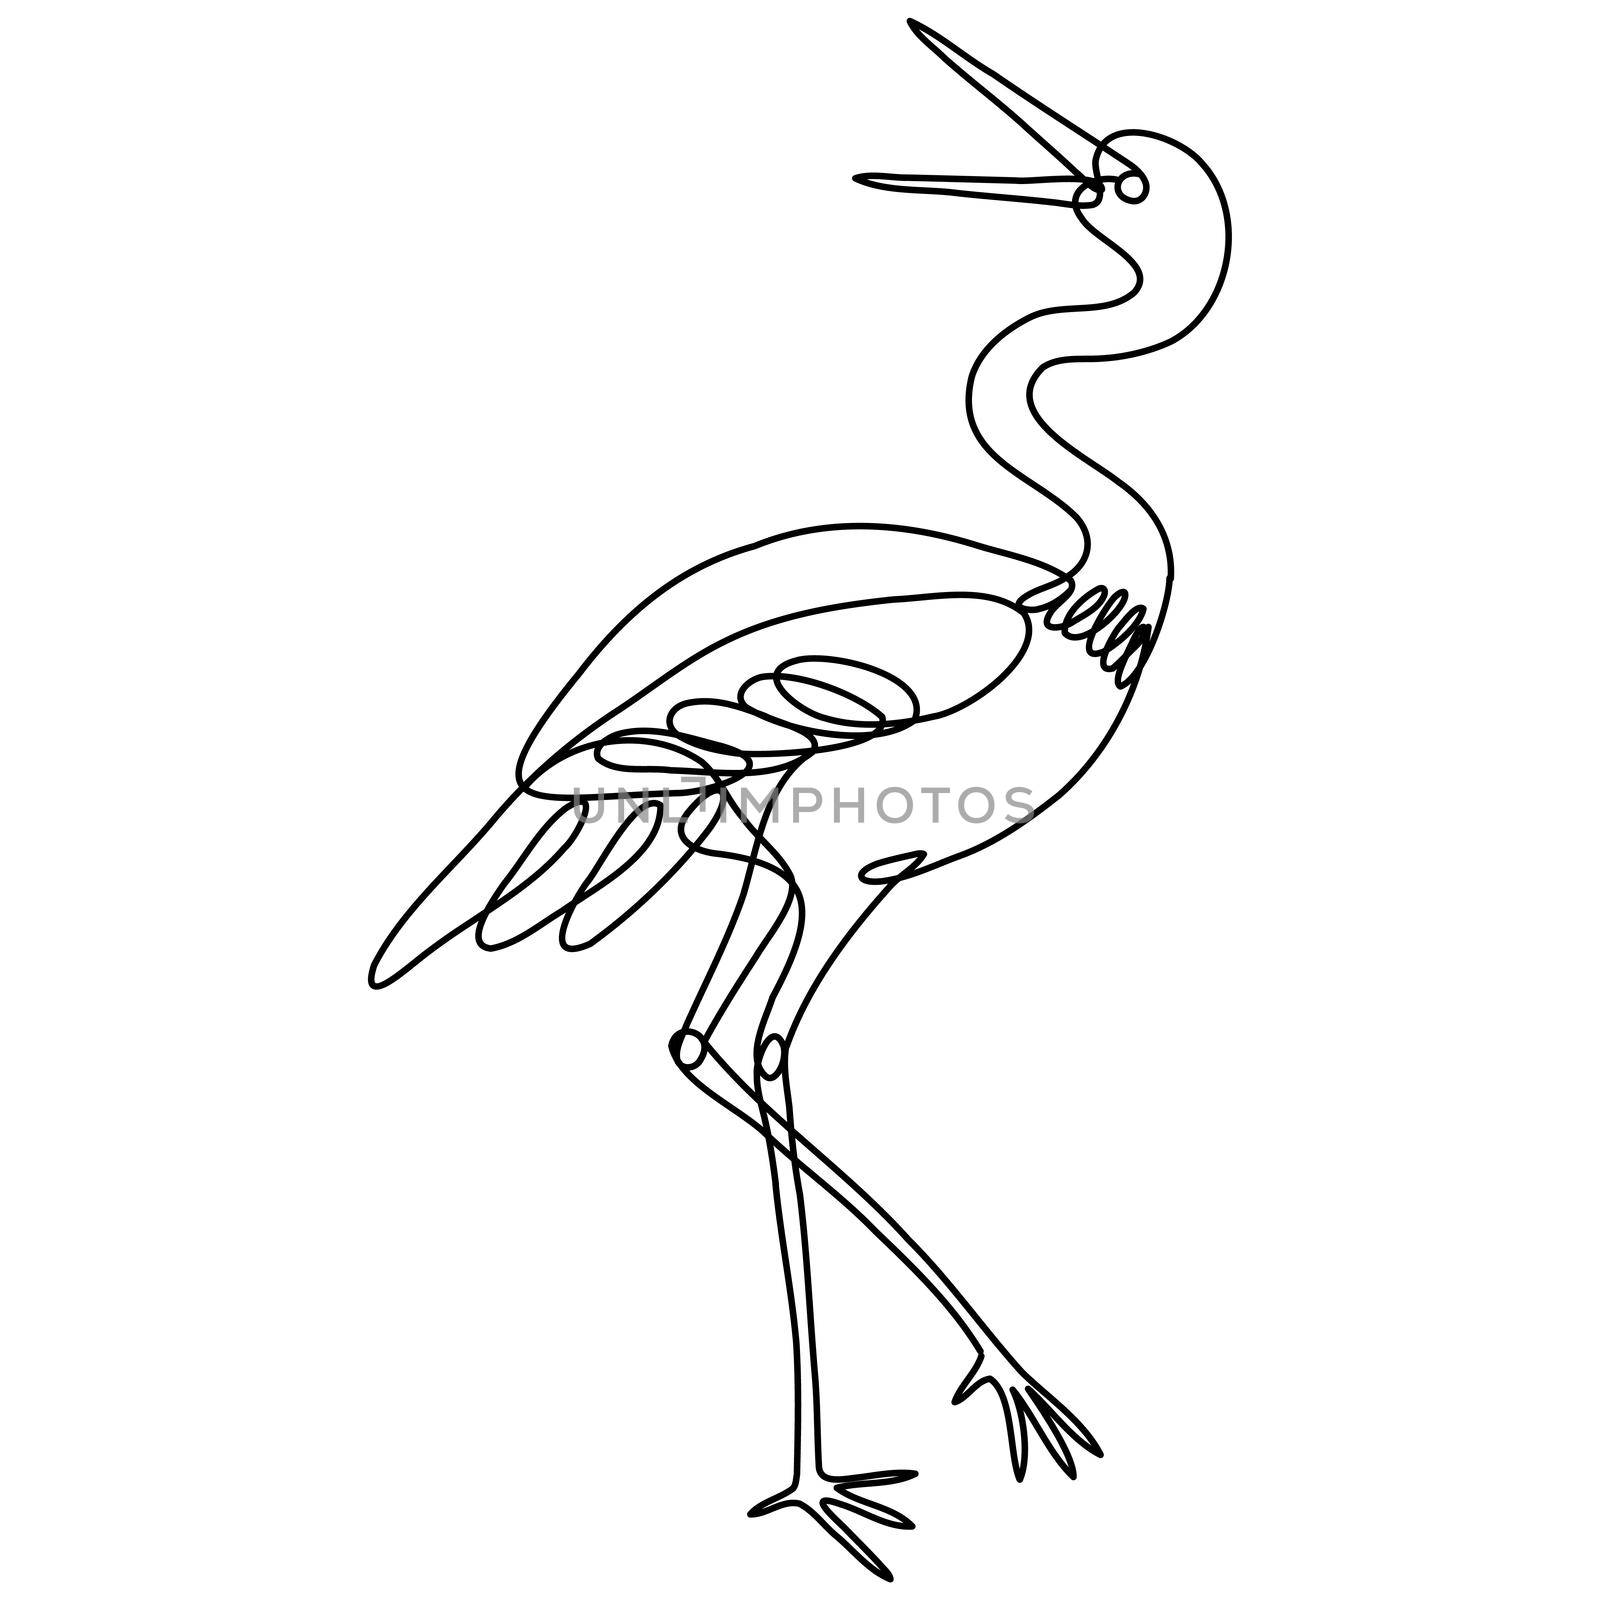 Continuous line drawing illustration of a crane side view done in mono line or doodle style in black and white on isolated background. 